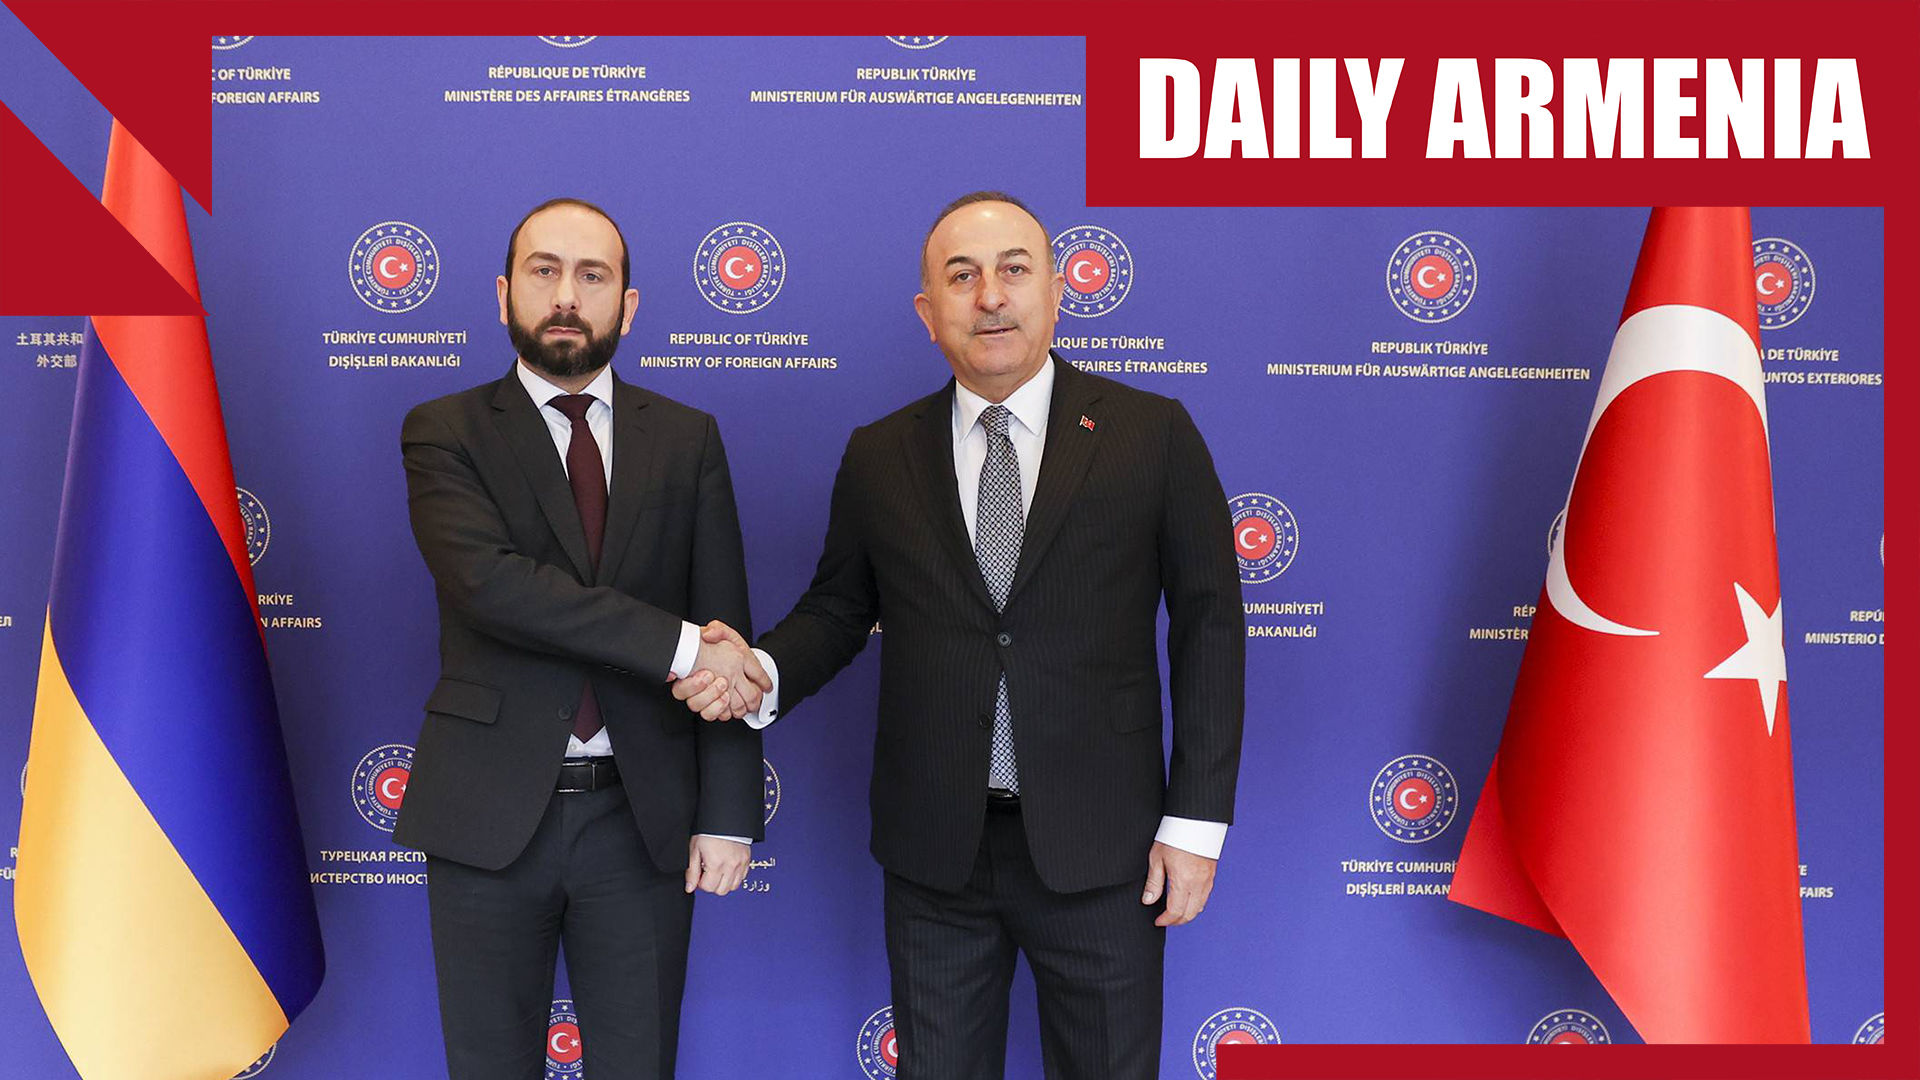 Armenia calls for resumption of normalization talks with Turkey